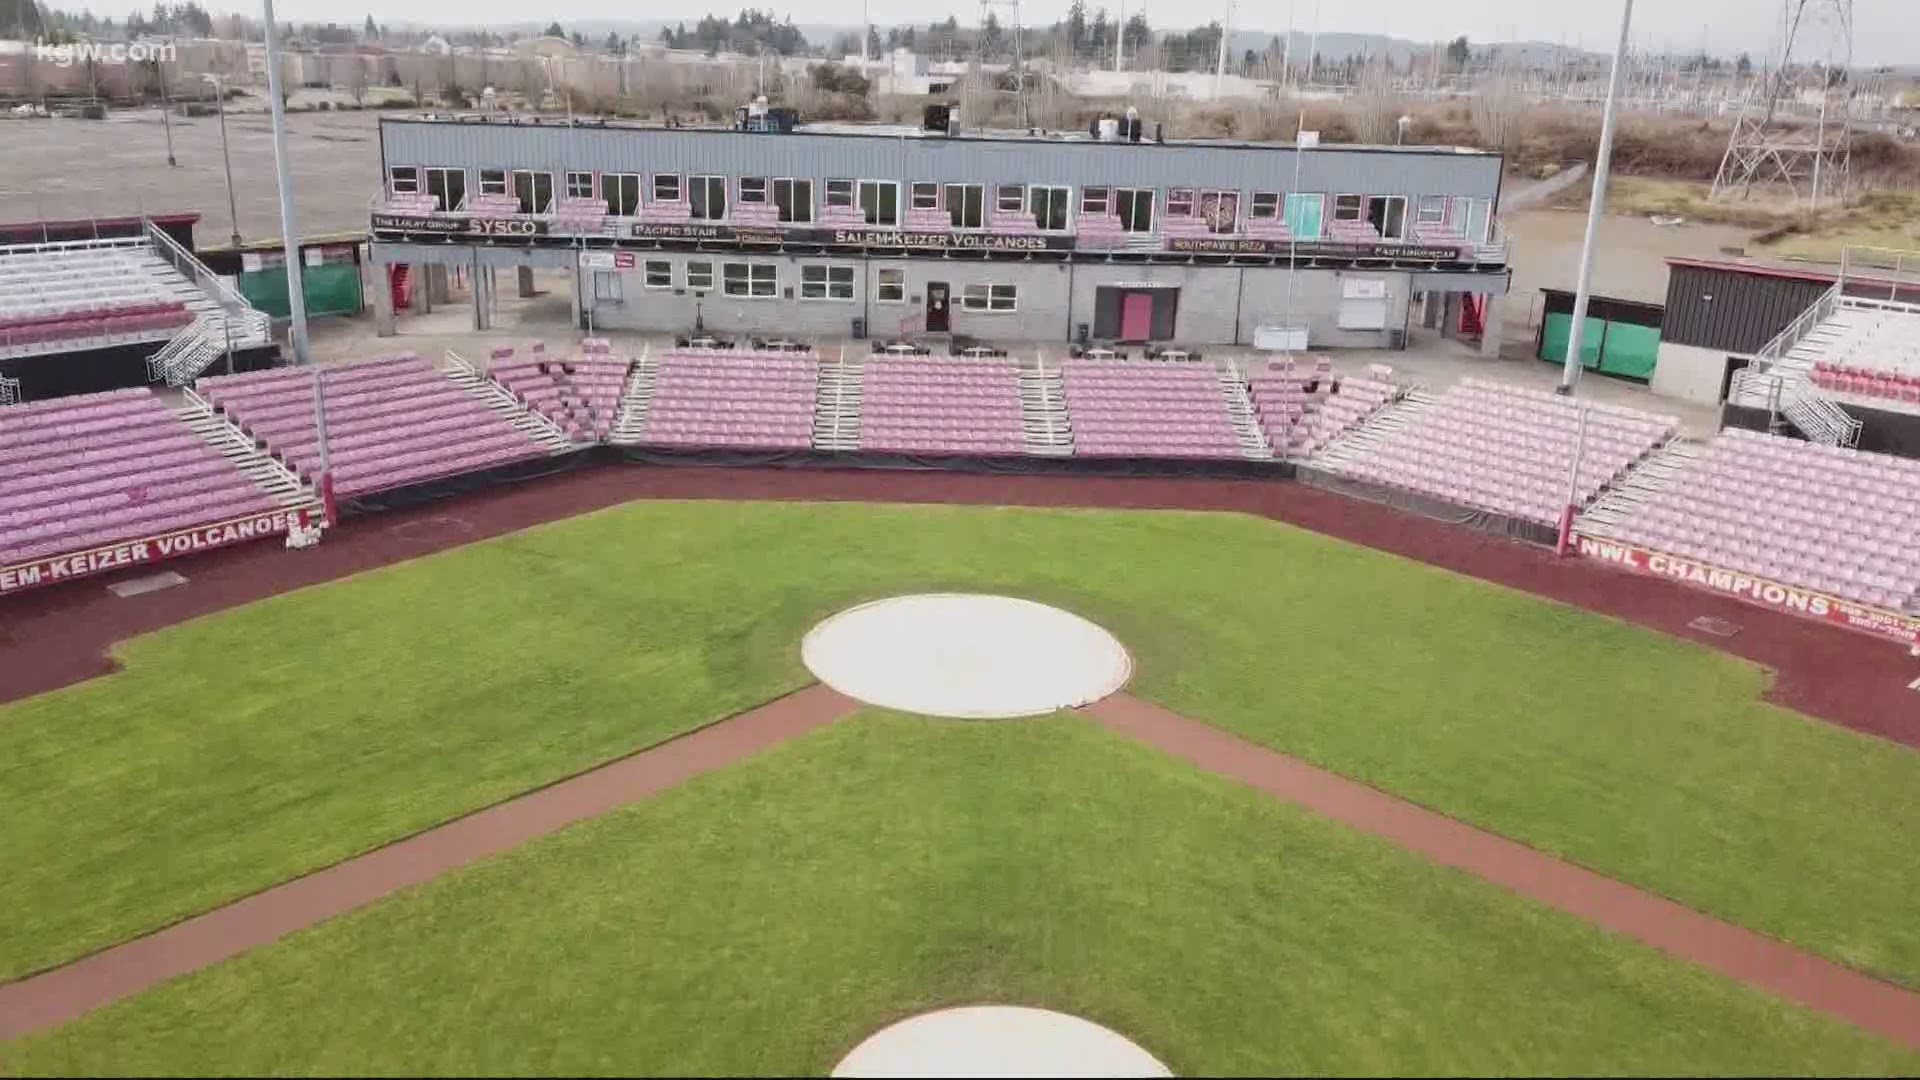 Need to rent a stadium? The baseball field that’s home to the Salem-Keizer Volcanoes is for rent on Airbnb.